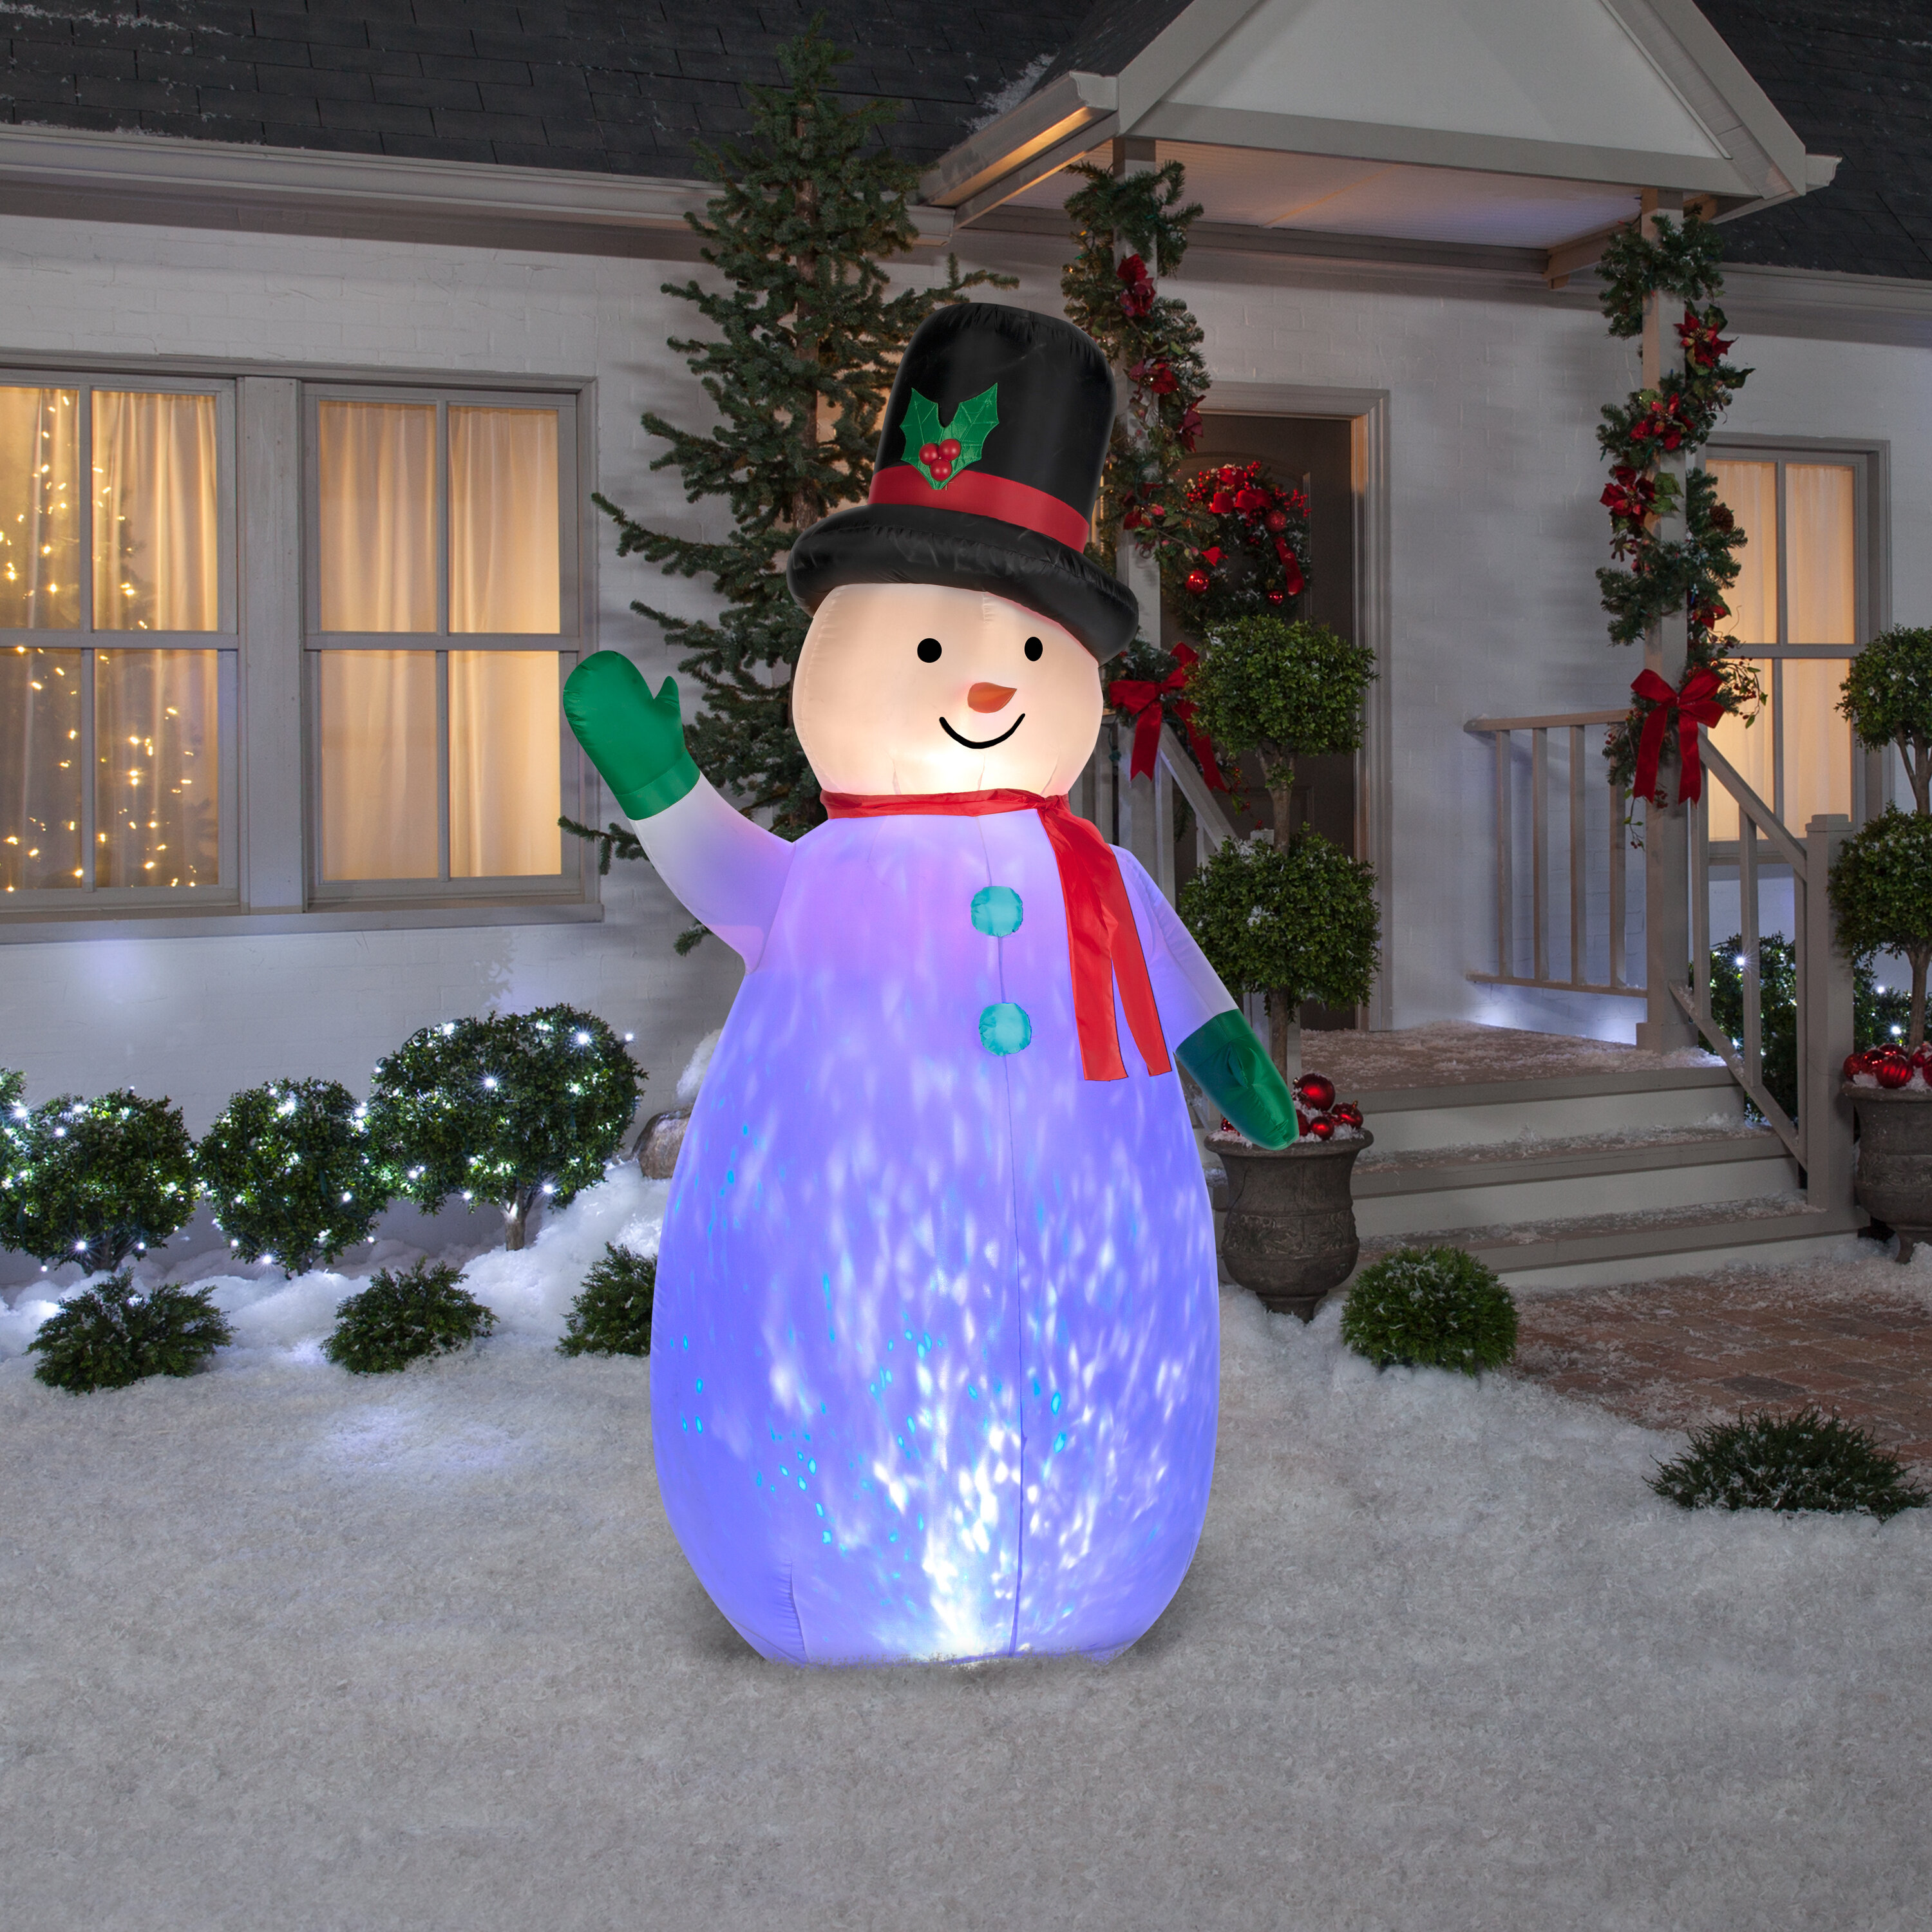 UNIFEEL 4ft Inflatable Snowman with Kaleidoscope Lightshow Colorful Light Merry Christmas Inflatable Lighted Yard Decoration with Blower and Adaptor for Winter Indoor Porch Outdoor Decor